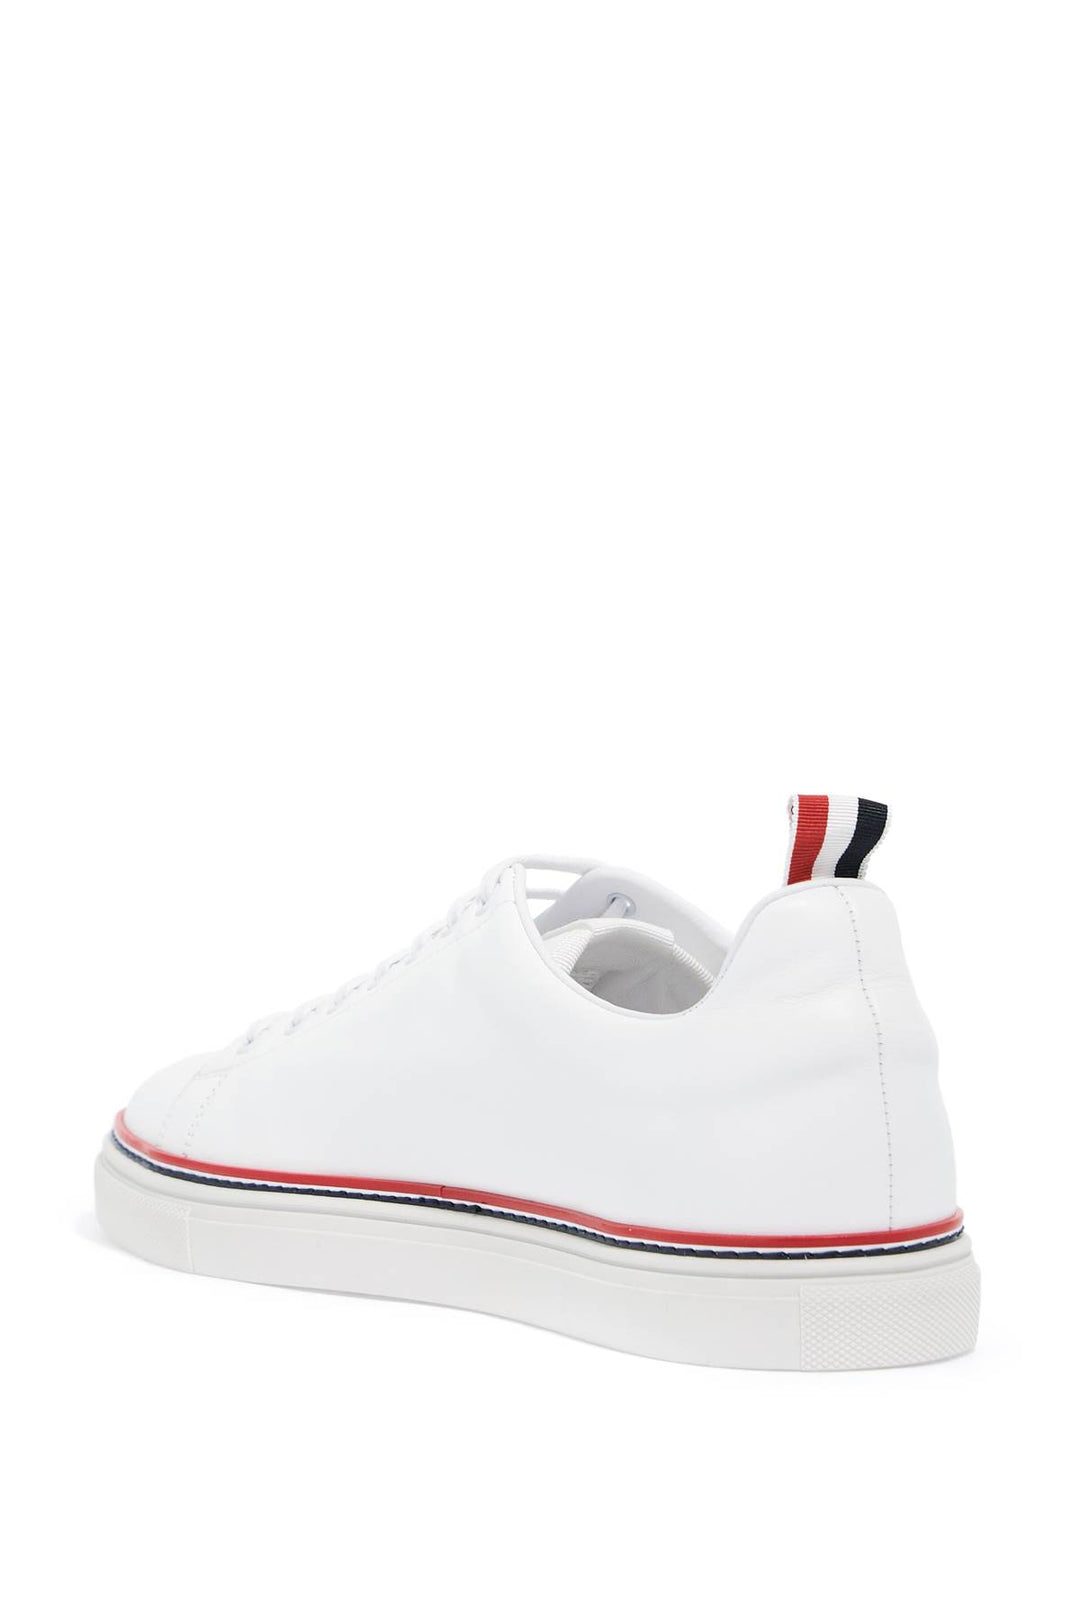 Thom Browne Smooth Leather Sneakers With Tricolor Detail.   White